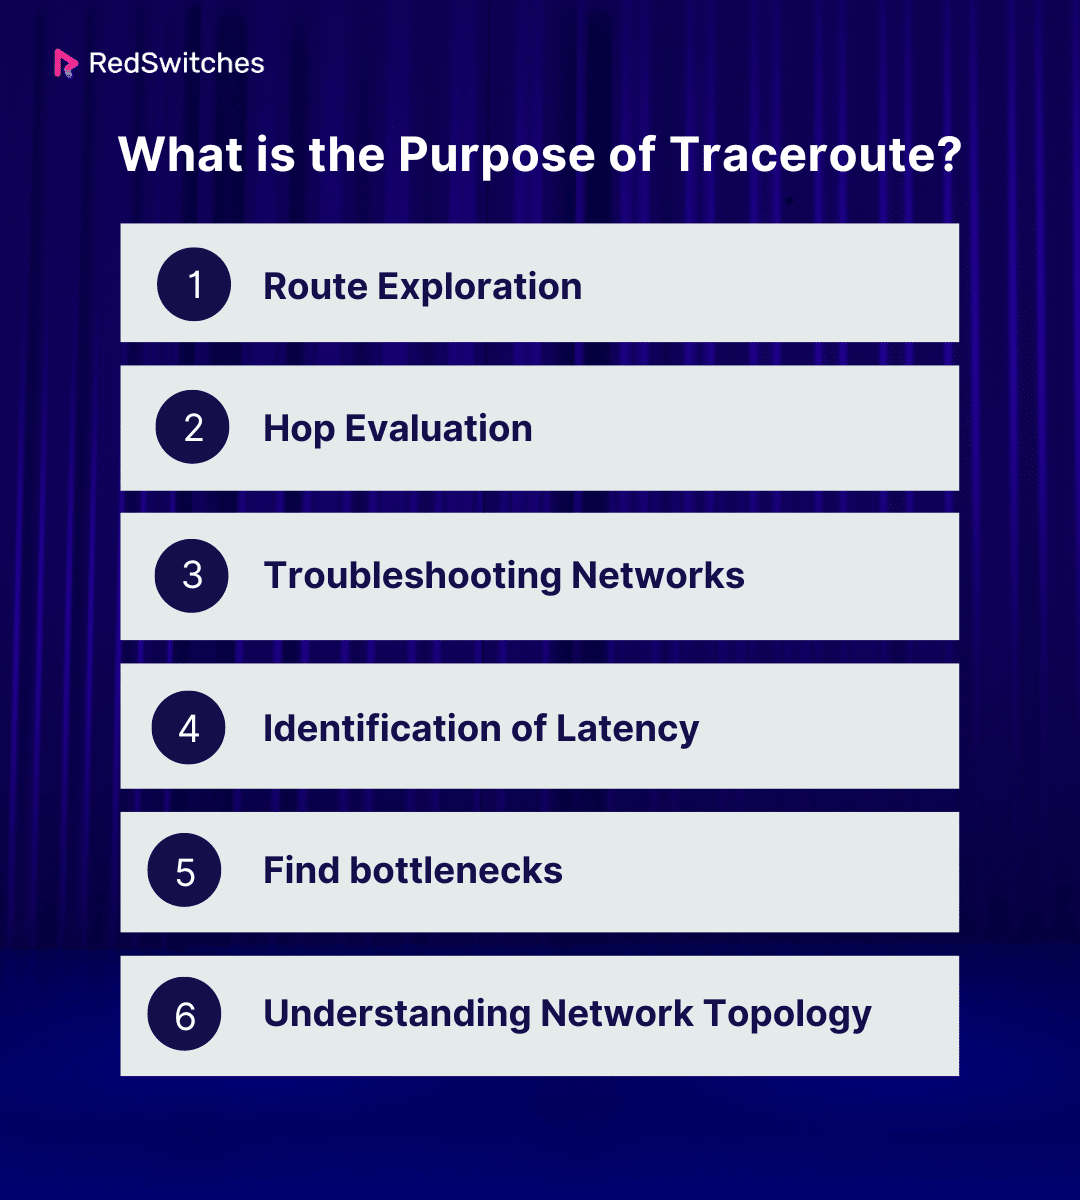 What is the Purpose of Traceroute?